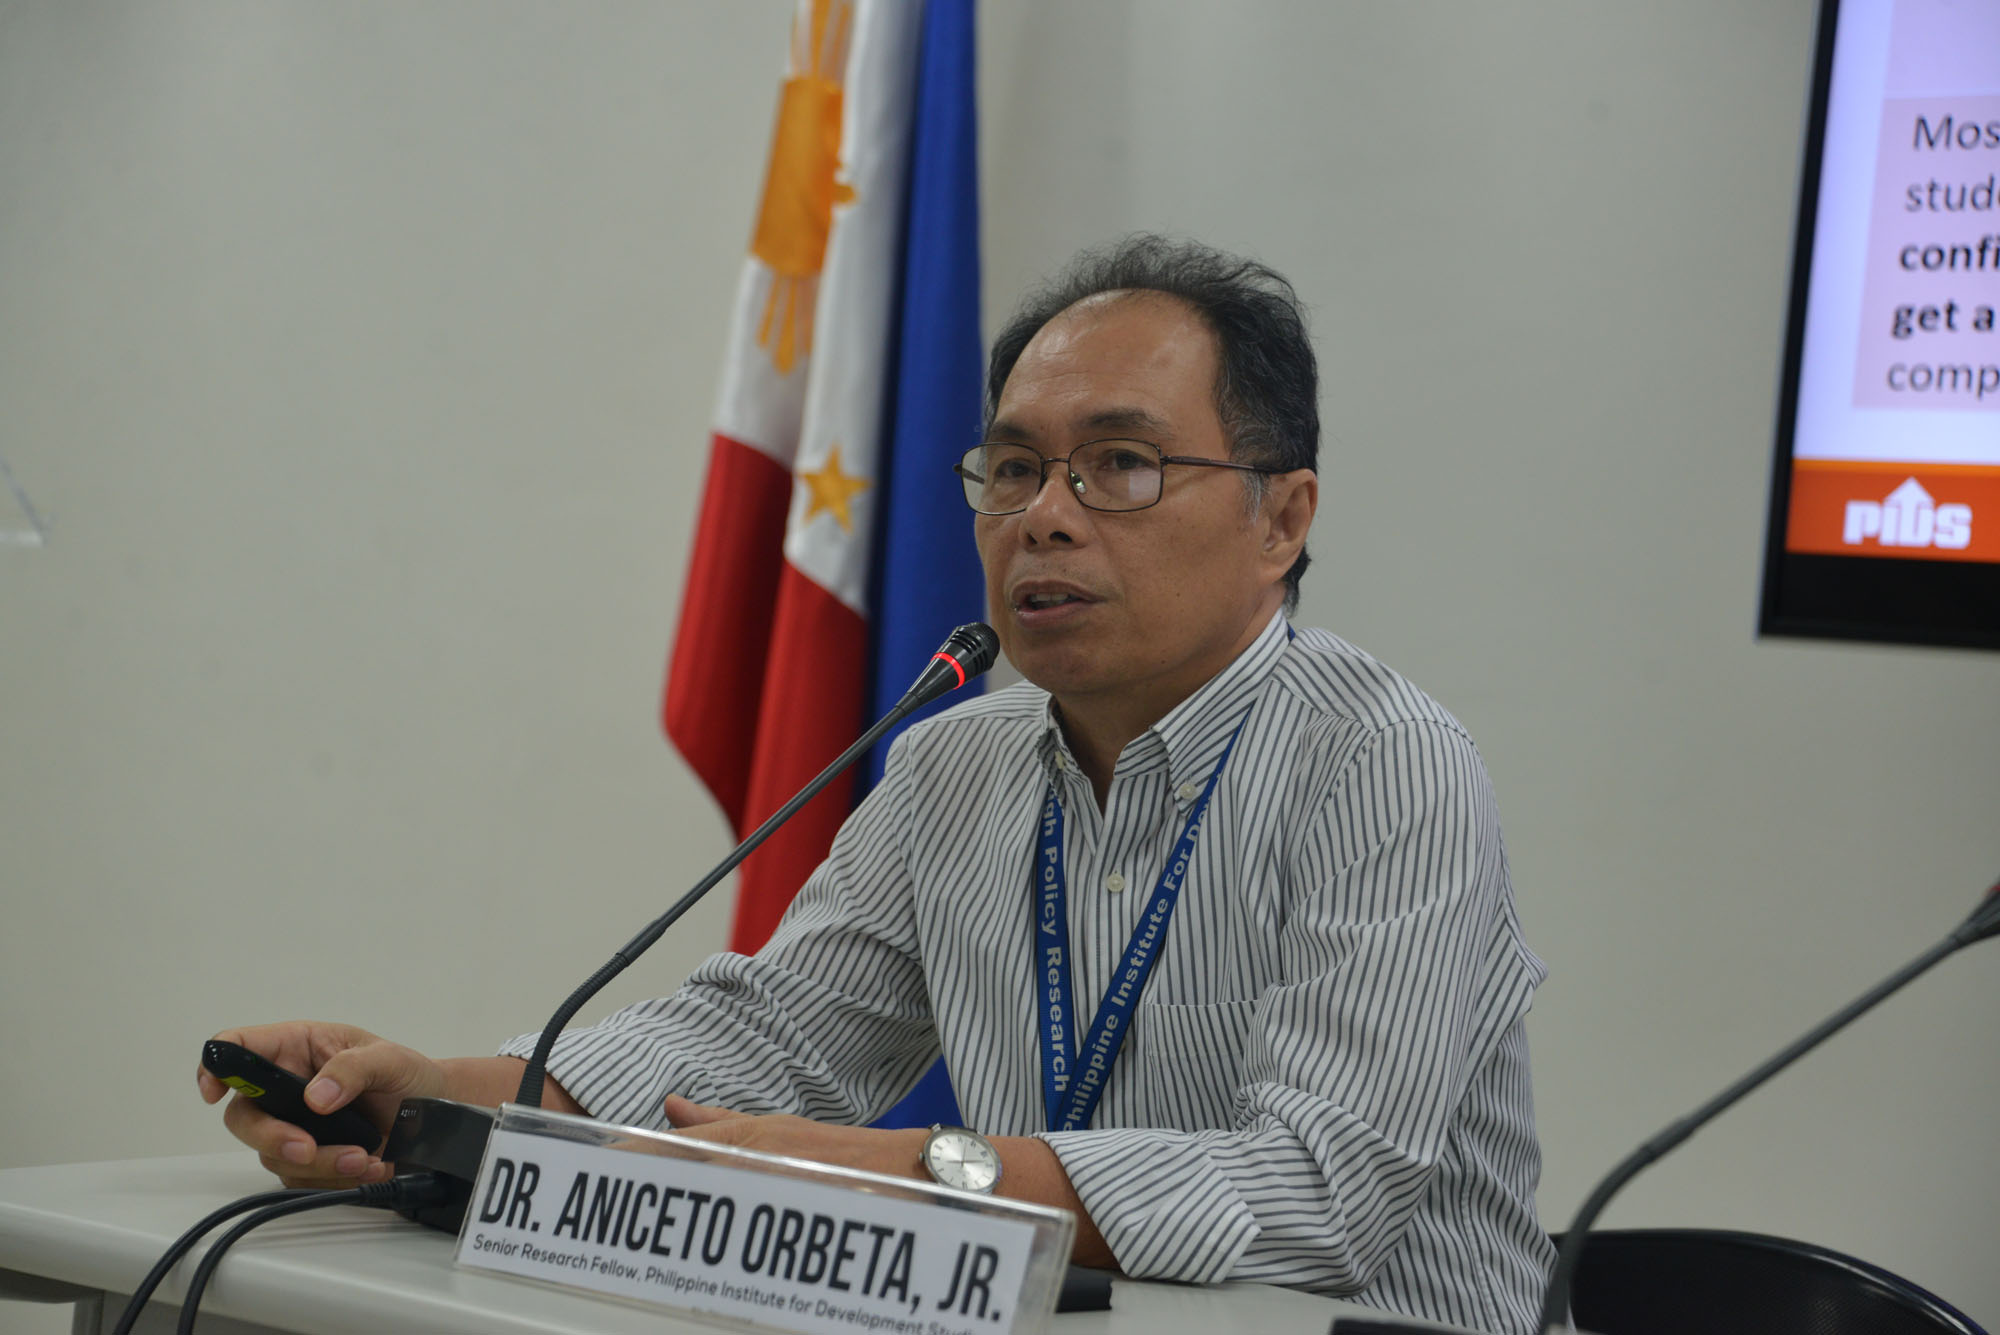 Public Seminar on Education and Human Capital Development in the Philippines-pids-educ-6-20190619.jpg